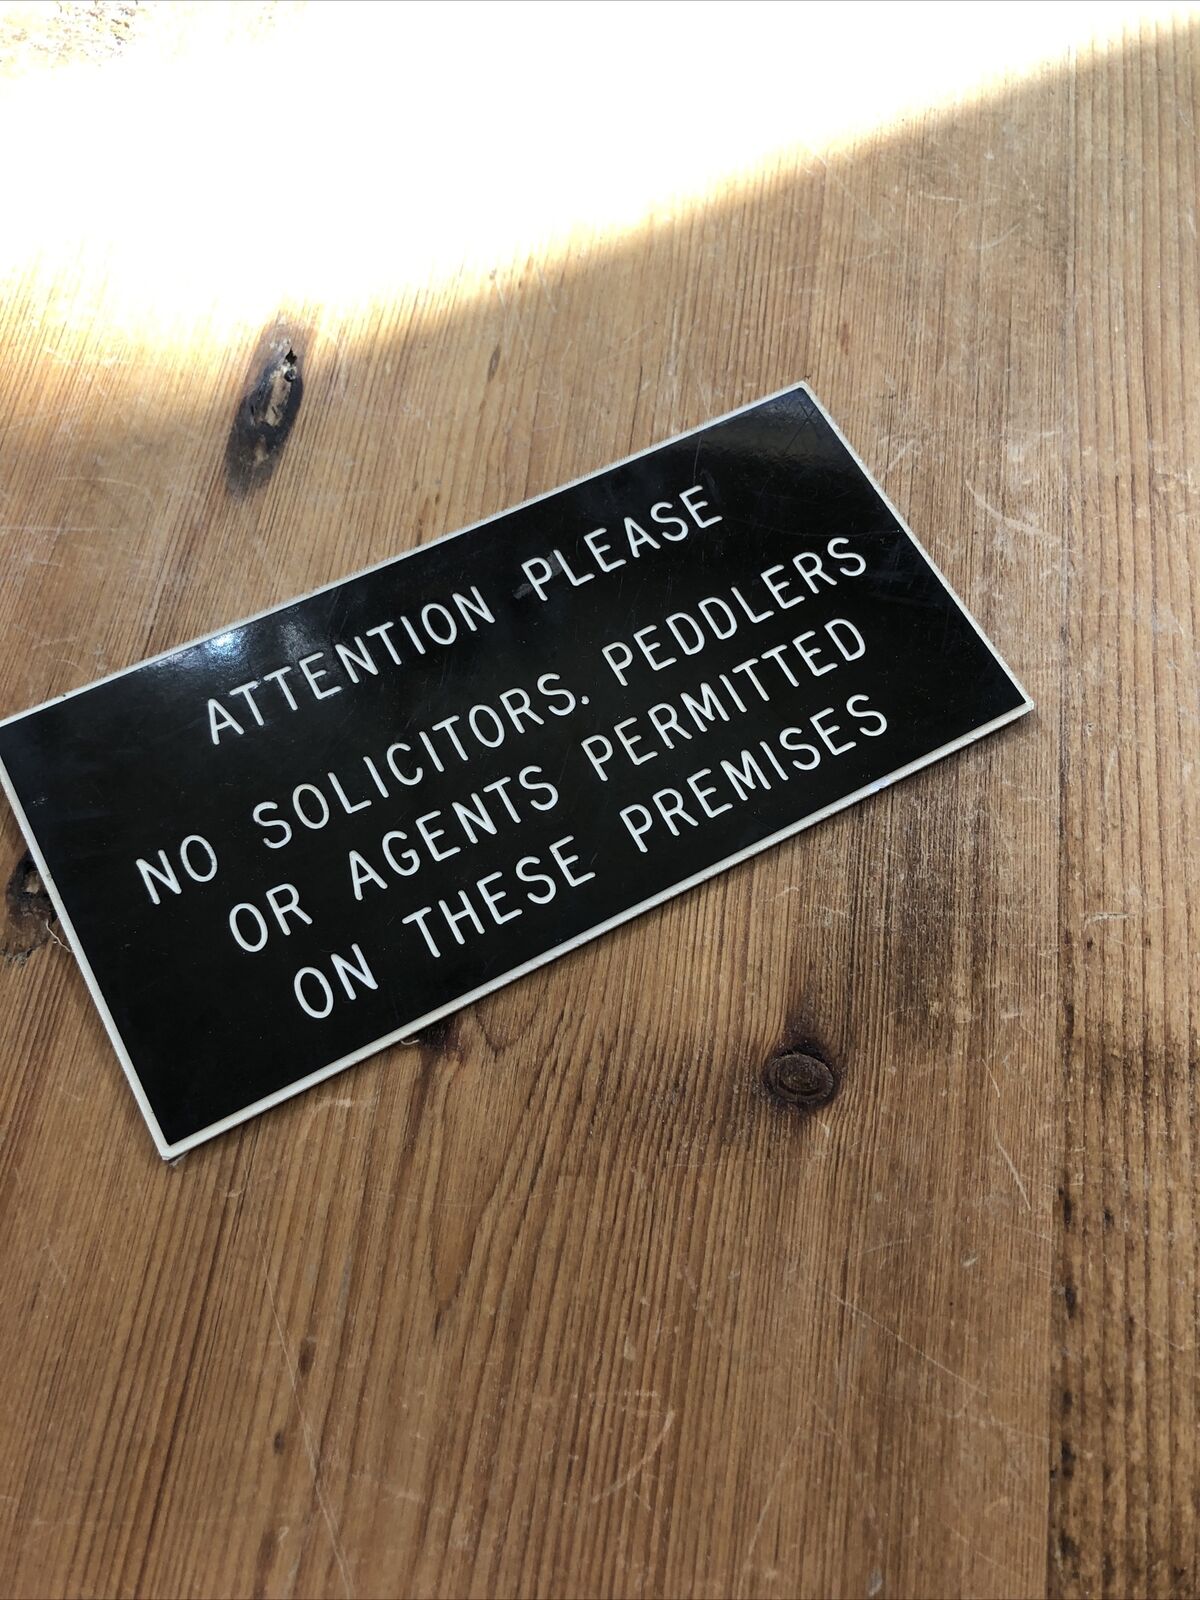 Vintage Tactile Attention Please No Solicitors Peddlers or Agents Sign